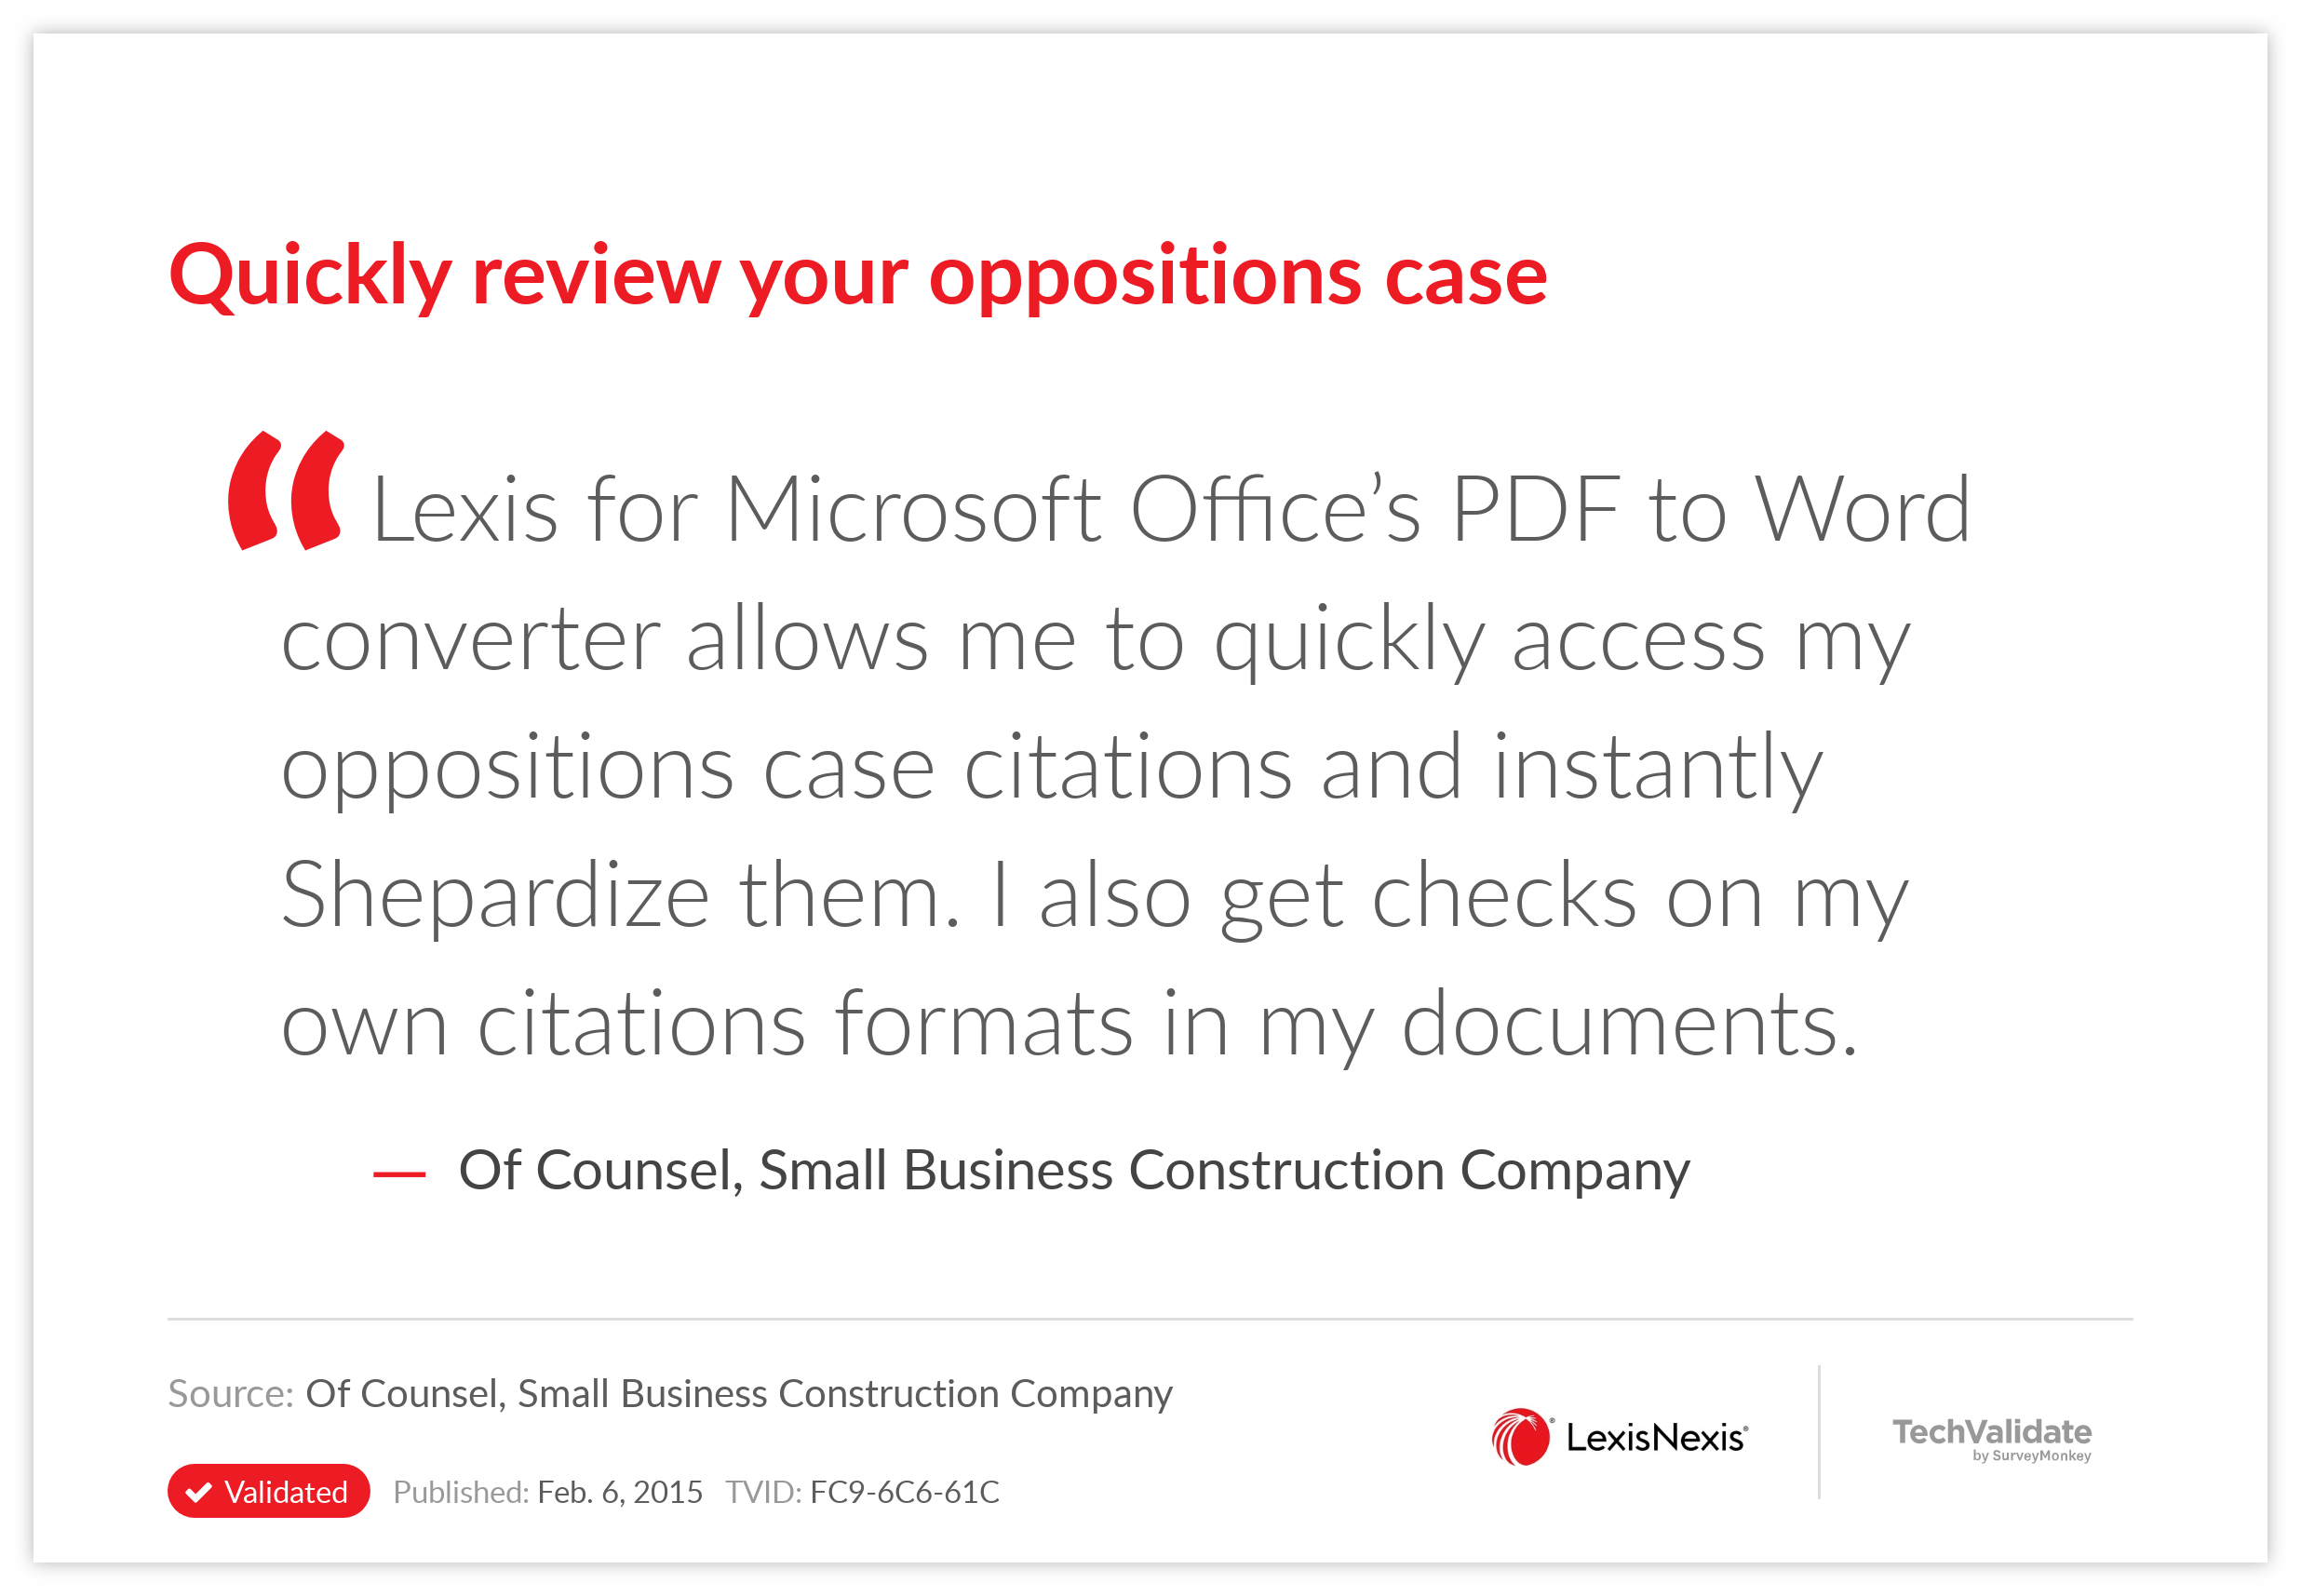 Quickly review your oppositions case